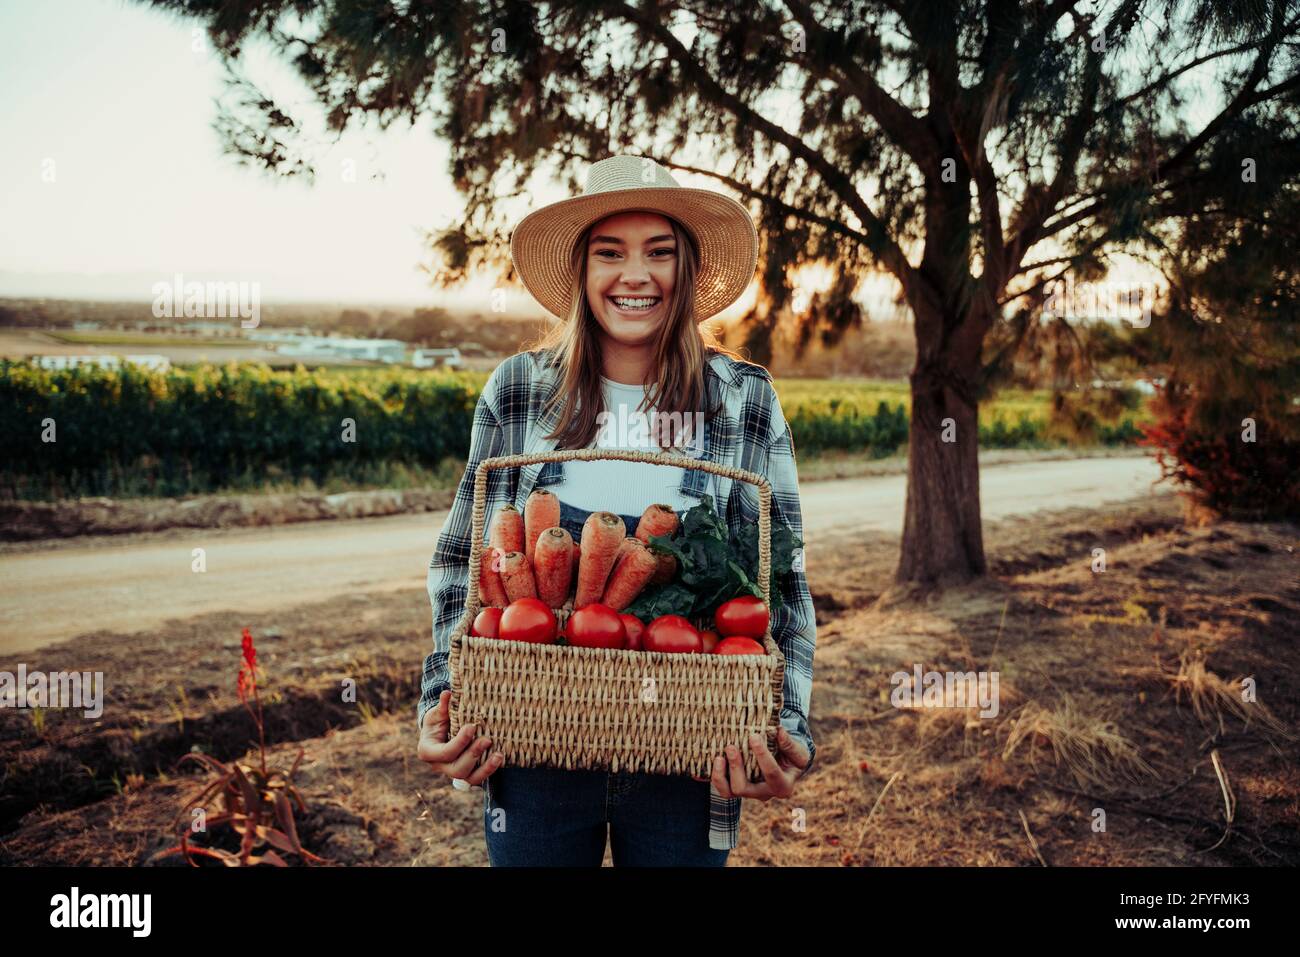 Caucasian female farmer giggling and smiling while holding fresh basket of vegetables Stock Photo